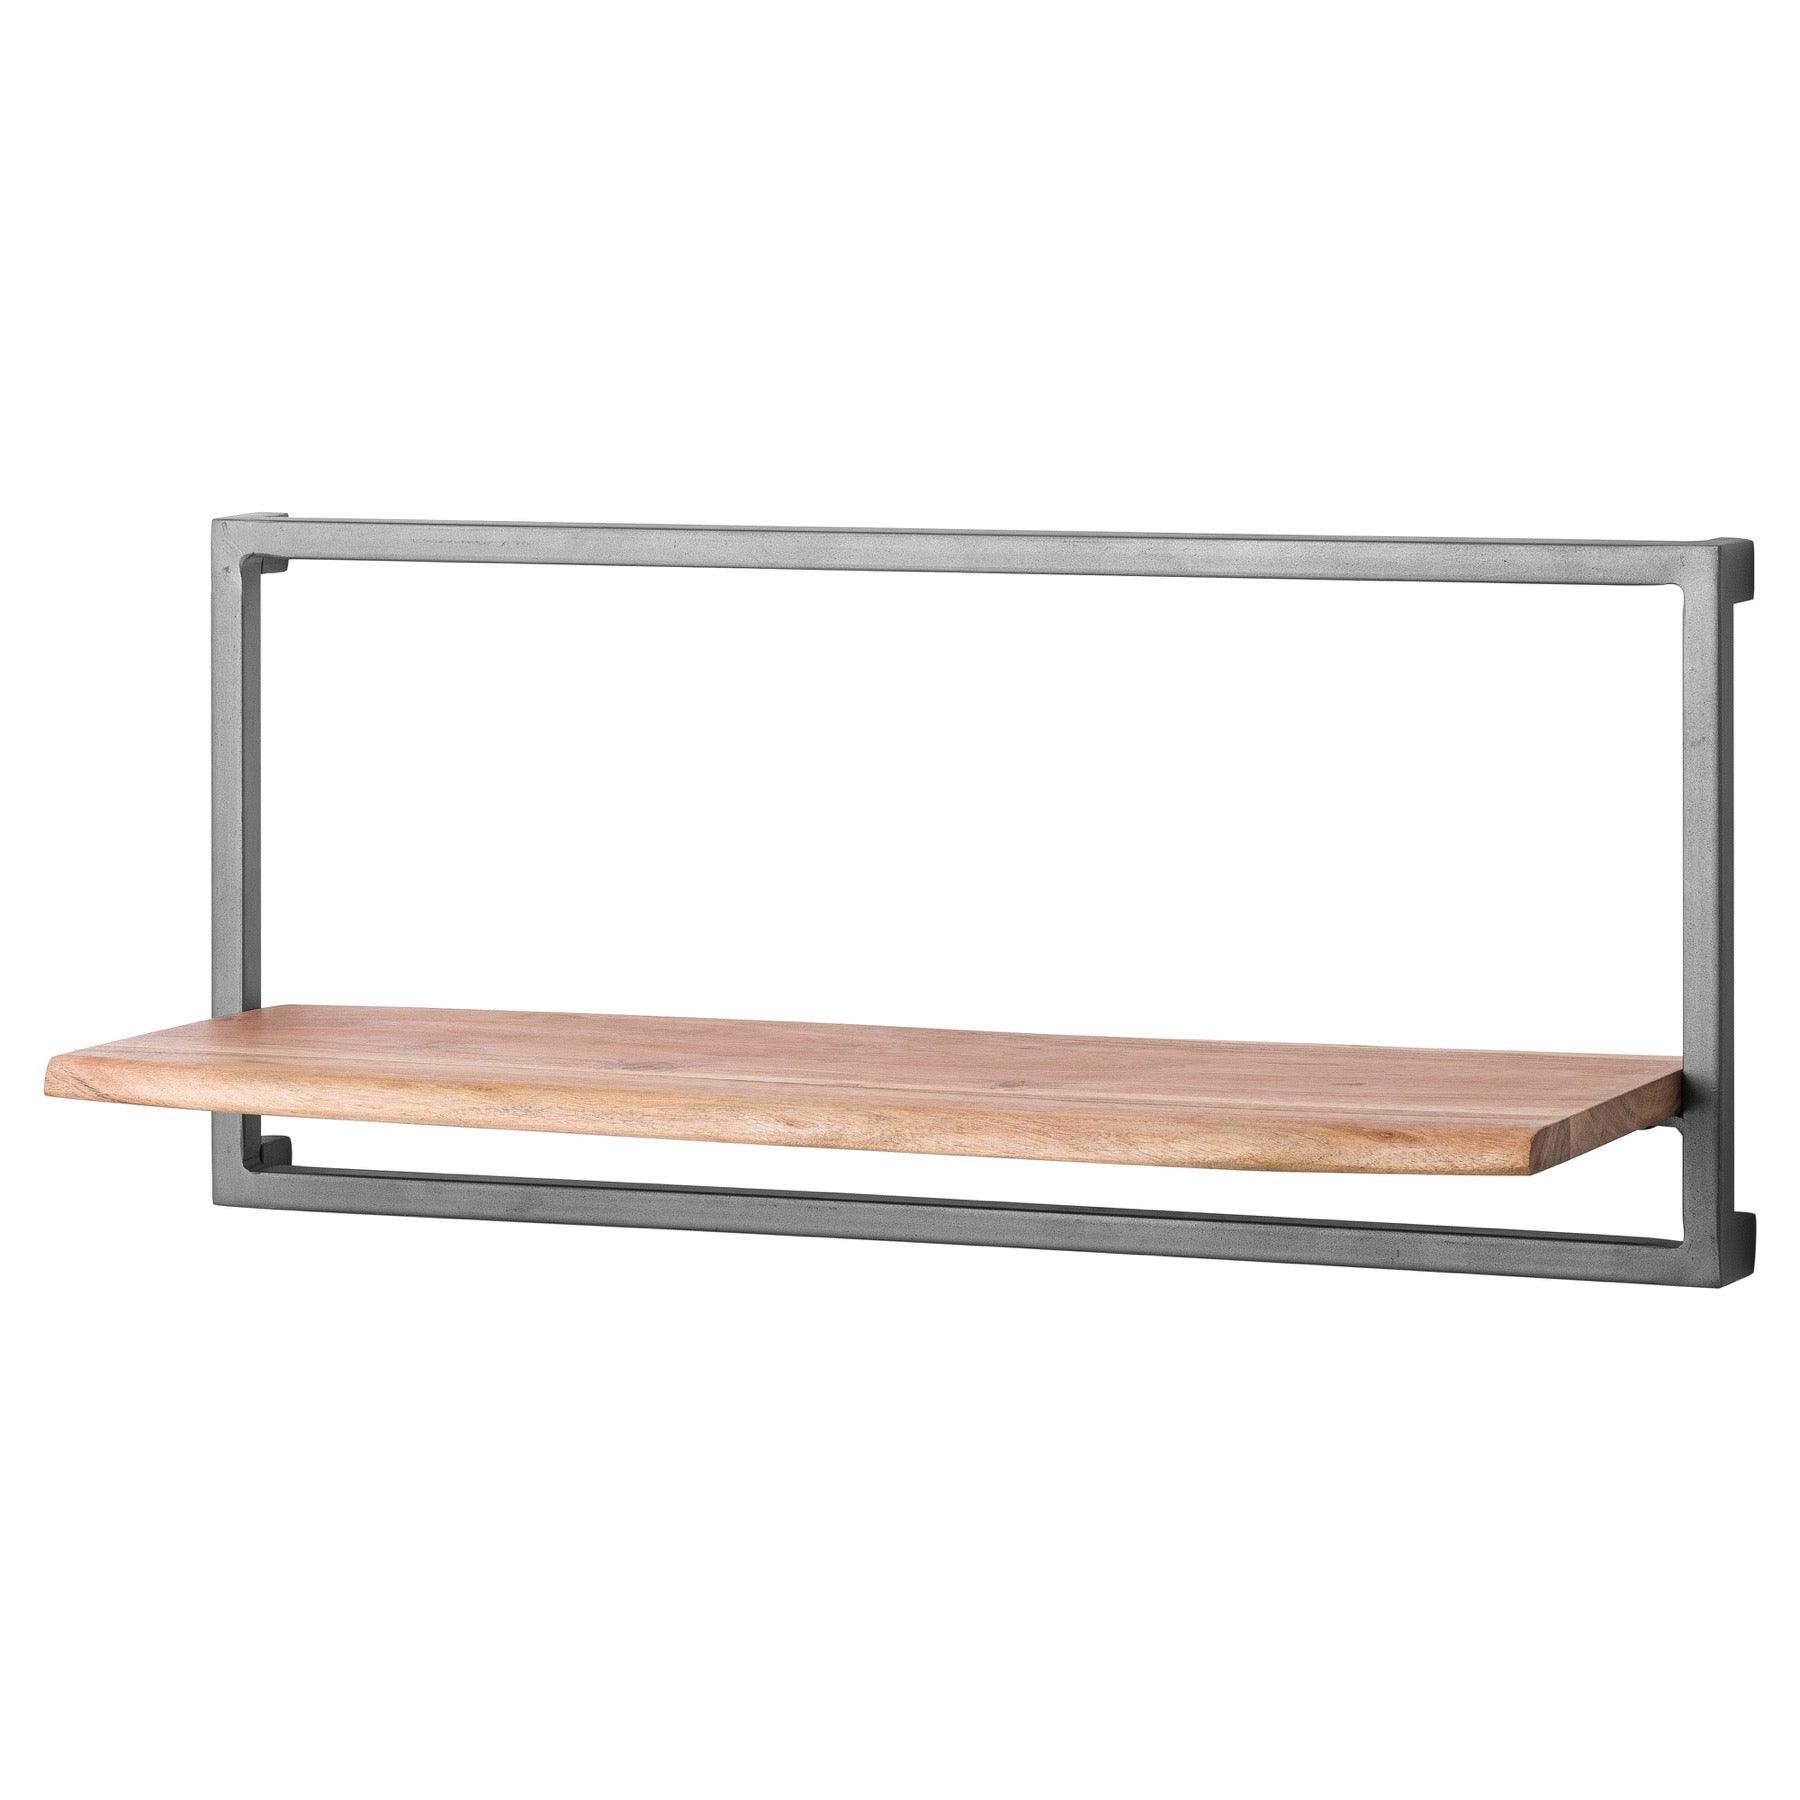 View Live Edge Collection Shelf information